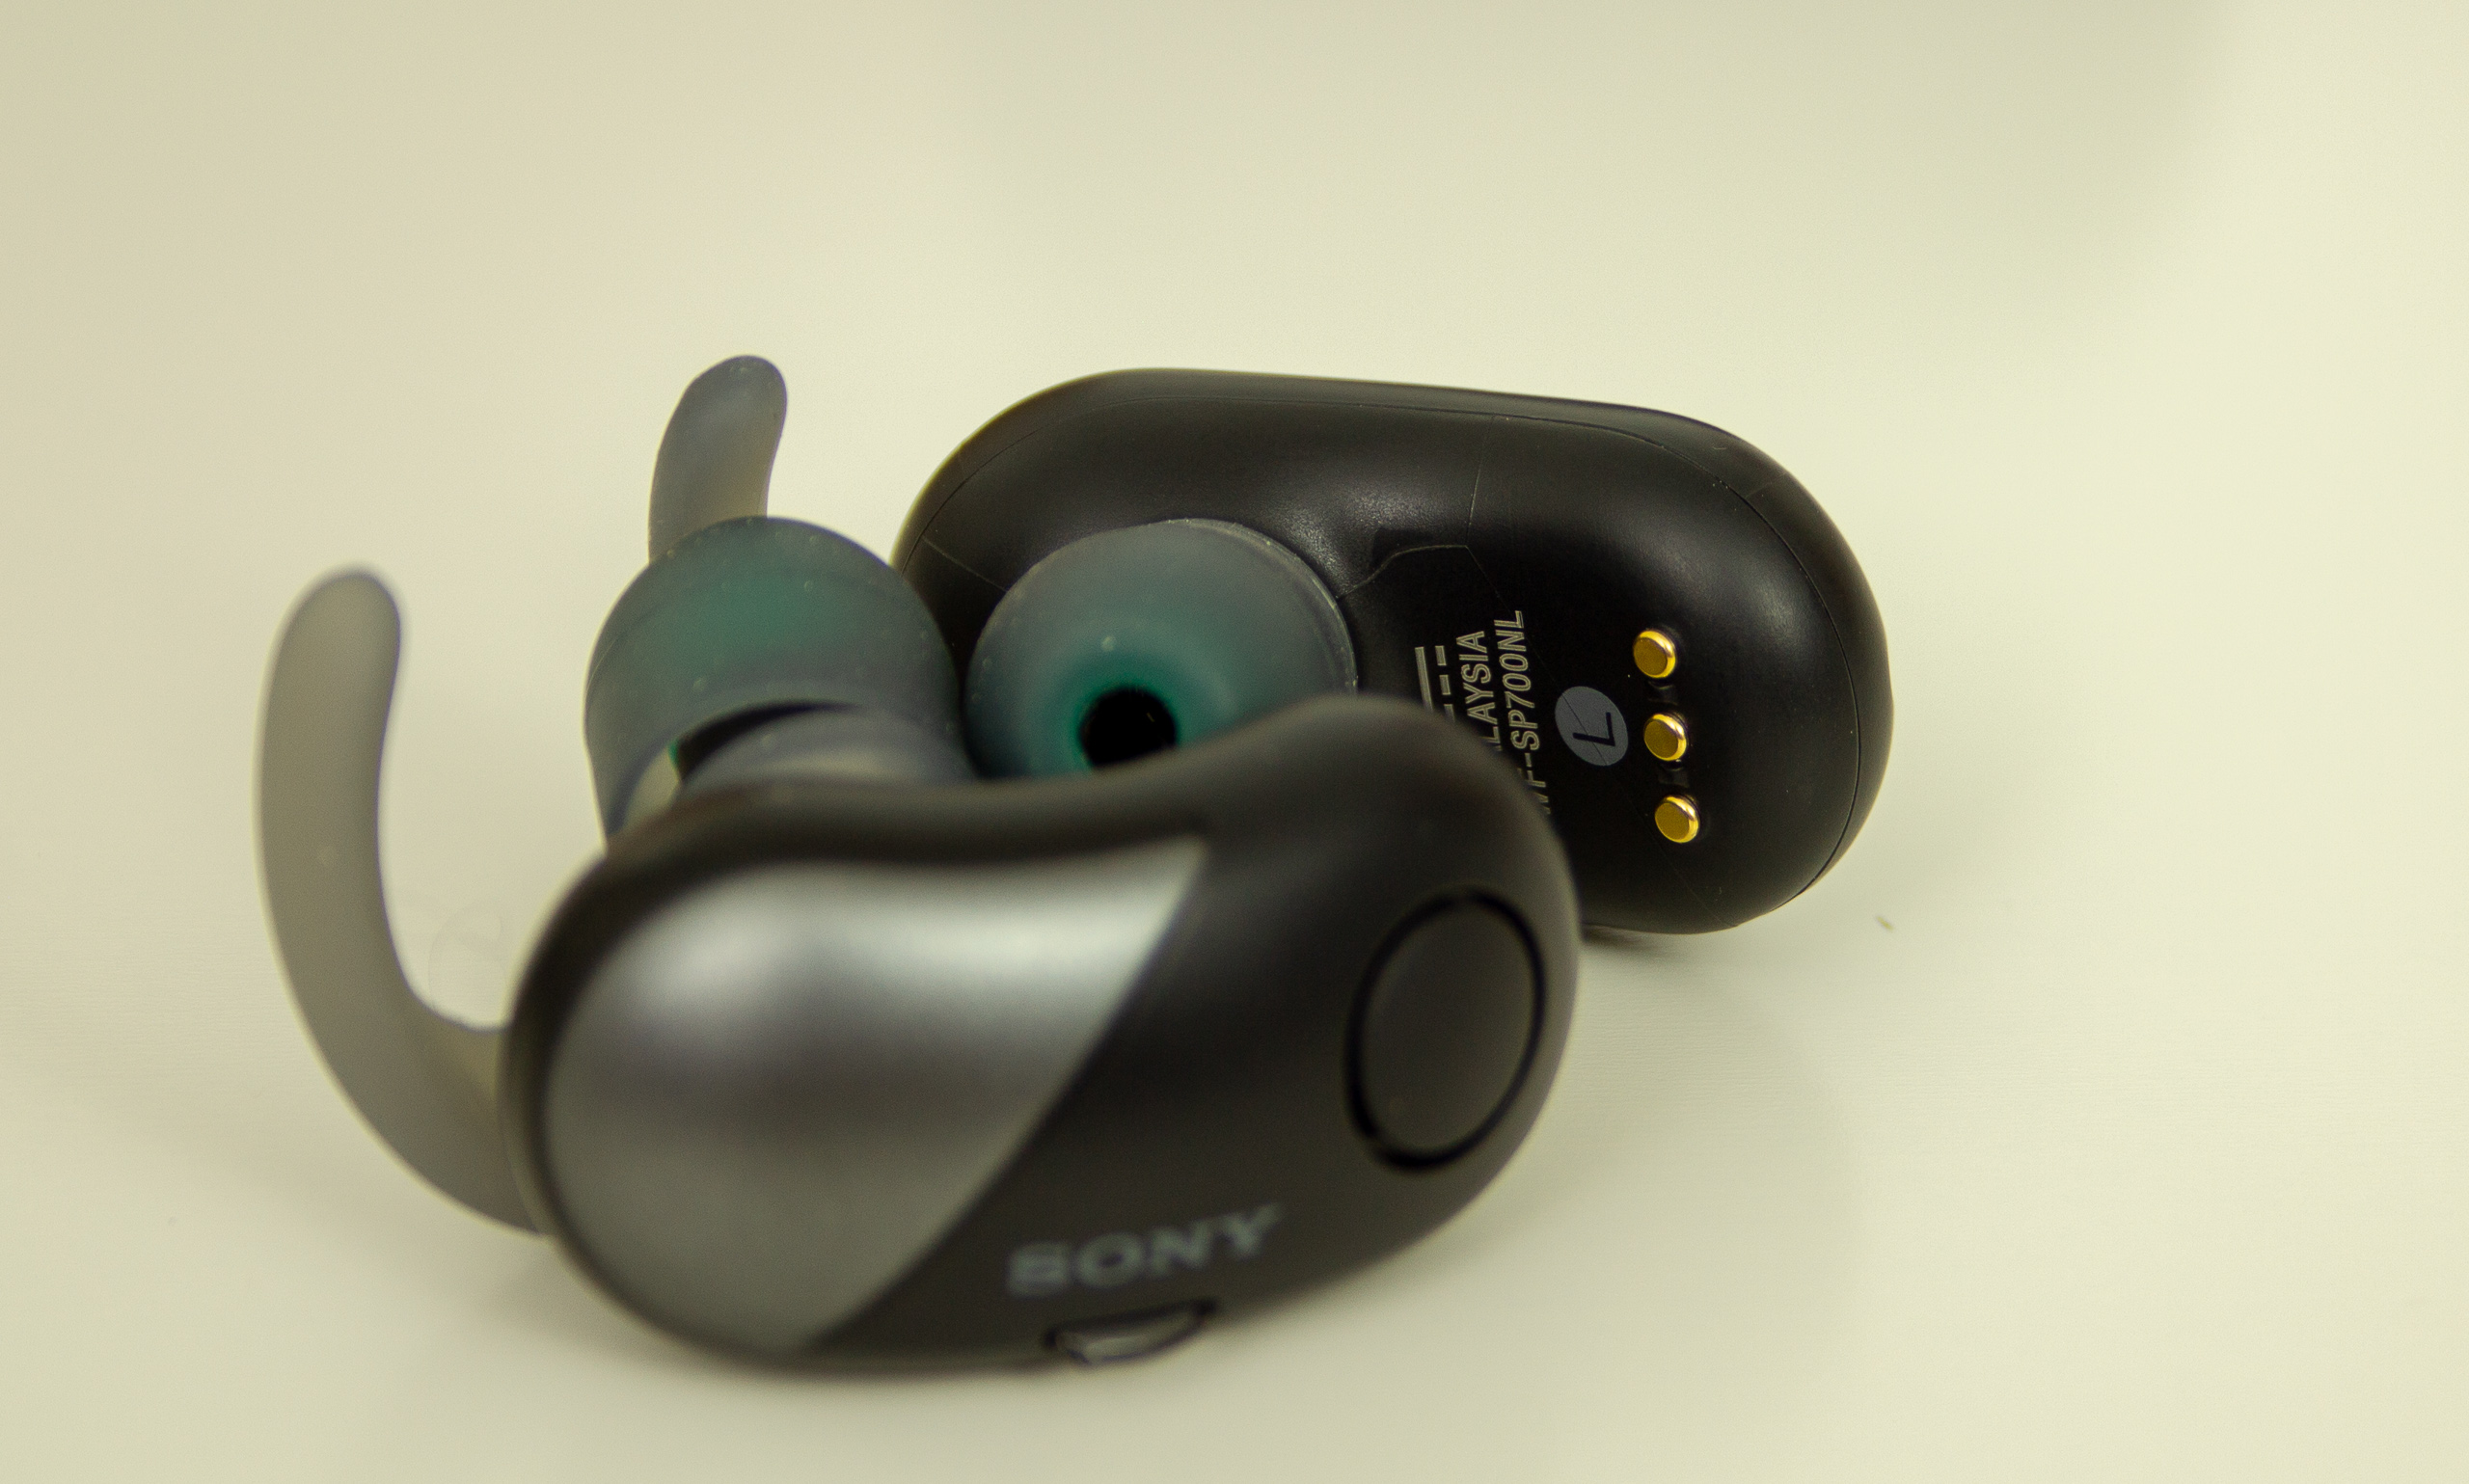 Sony WF-SP700N Noise-Canceling Earbuds Review - Truly Comfortable